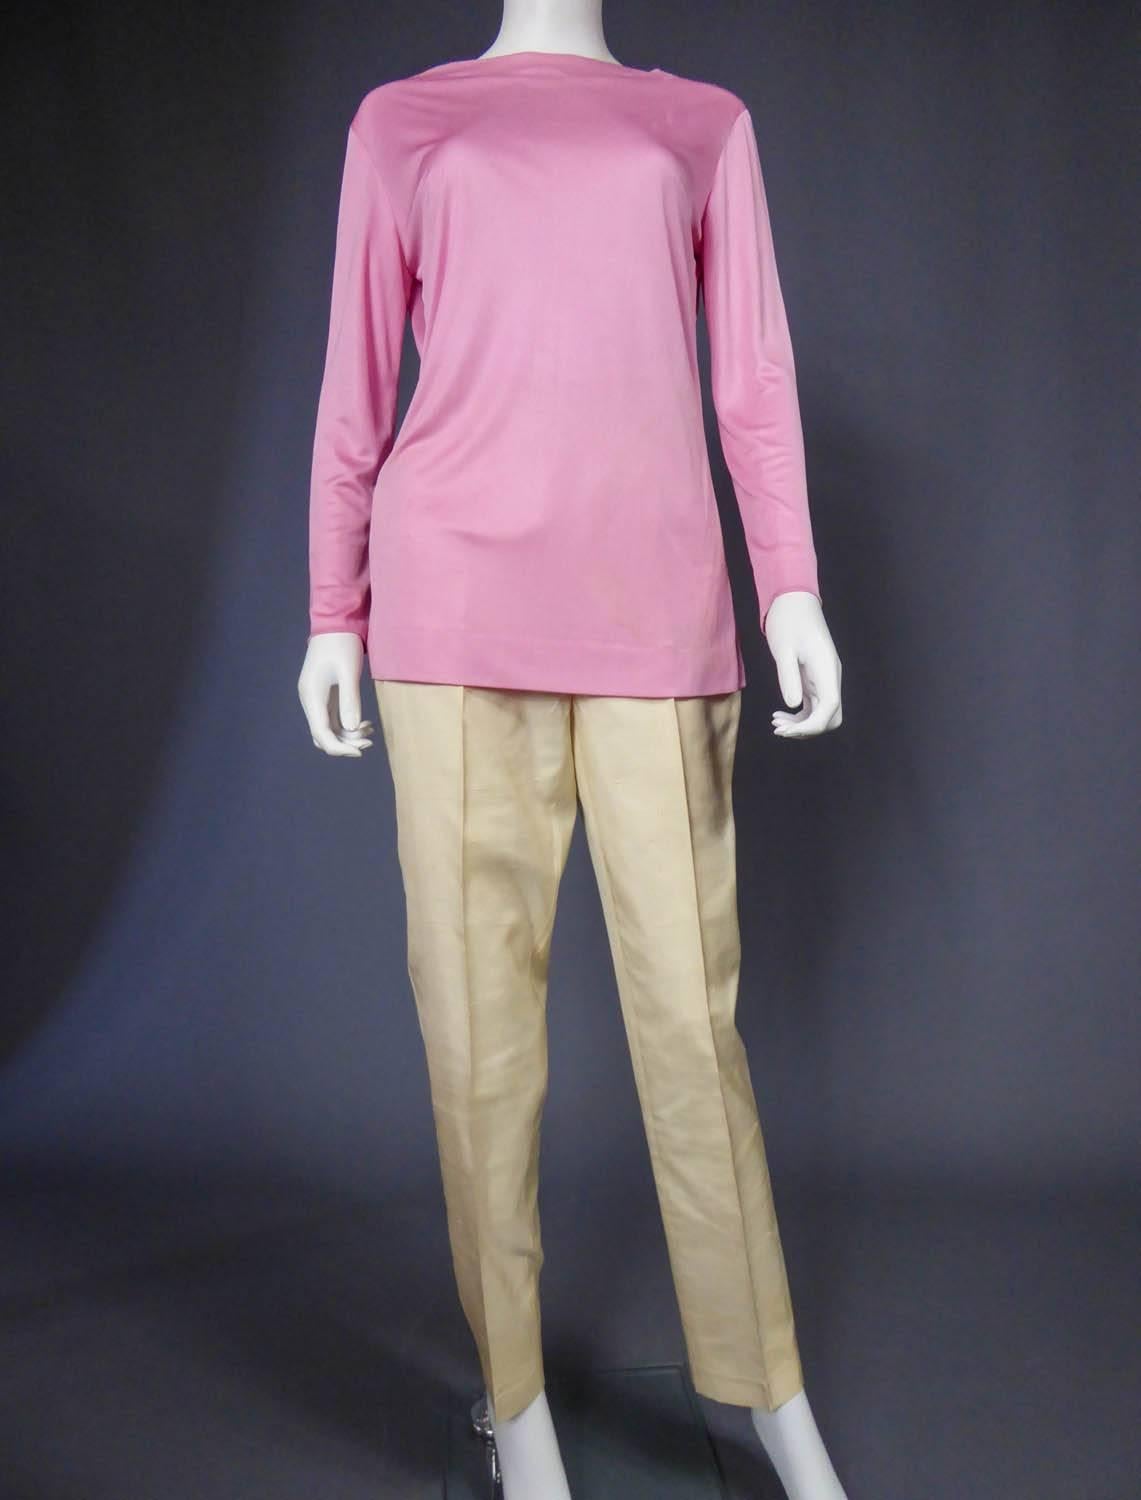 Circa 1960

Italy

Fluid-cut long sleeves top in pale pink silk jersey. Elegance and minimalism of fashion designer Emilio Pucci at the beginning. Label white background green graphics of the early 60s Emilio Pucci Florence - Italy Made in Italy